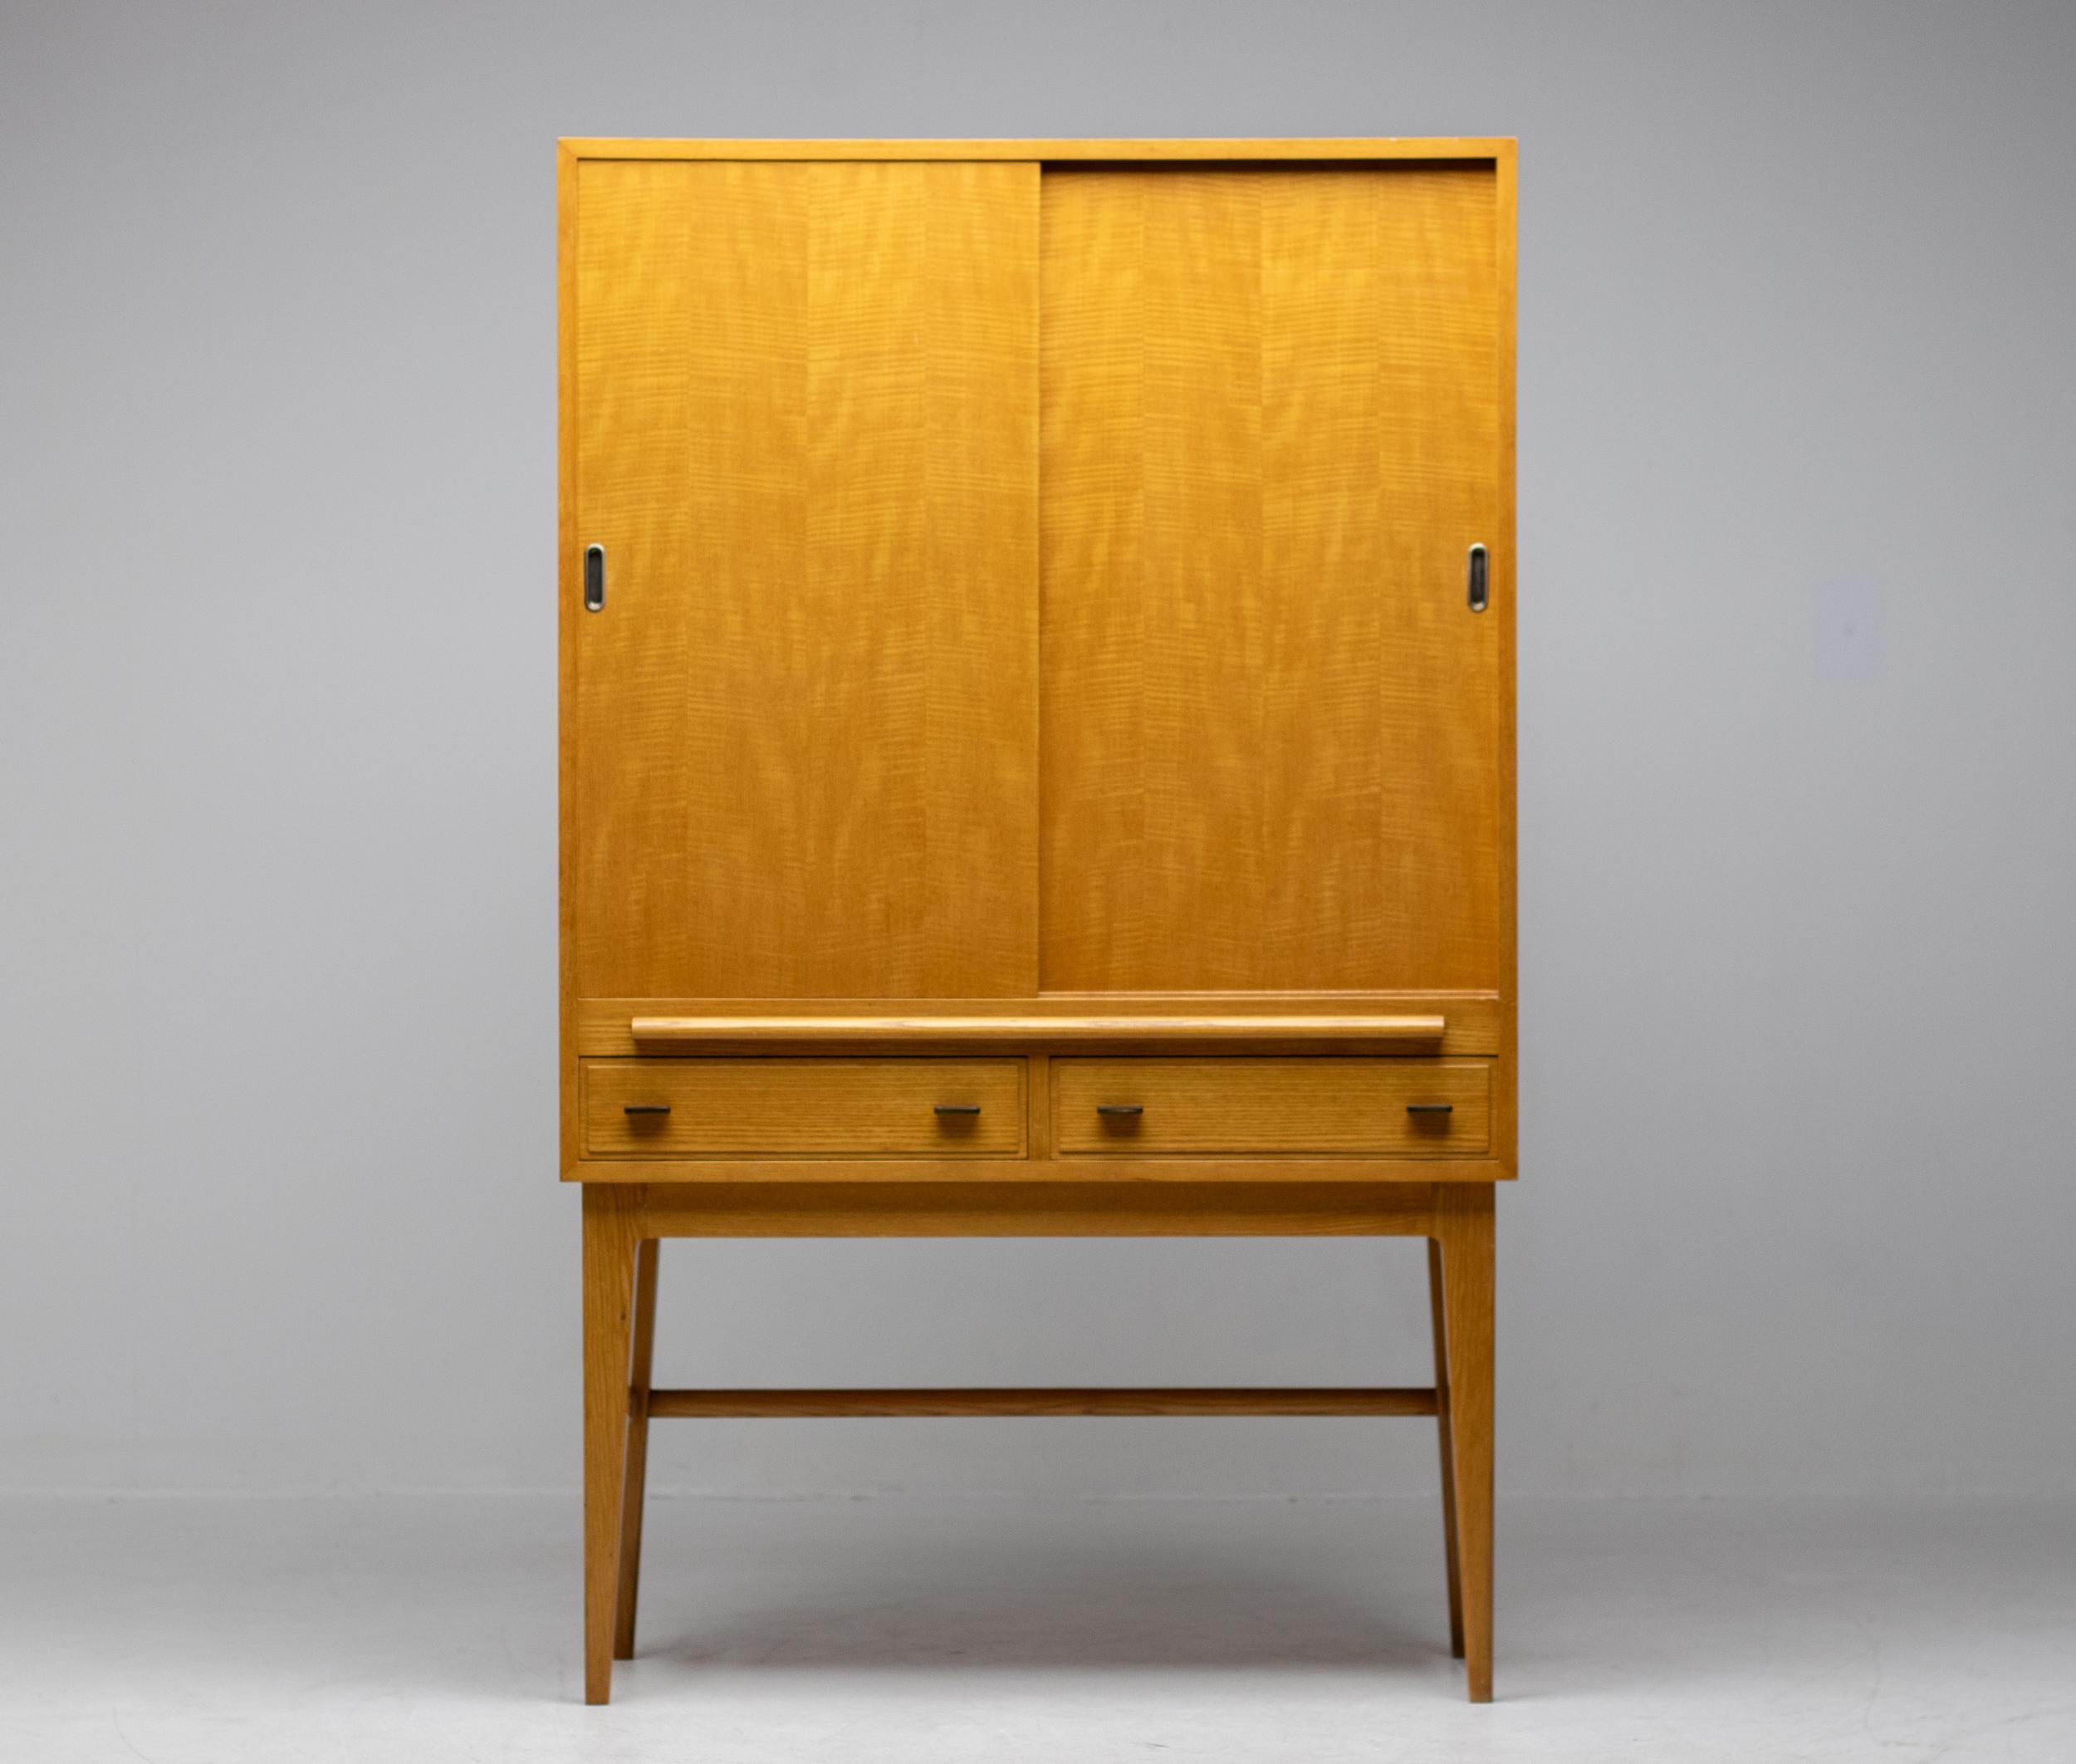 Beautiful cabinet made by Pander & Zonen, renown Dutch manufacturer of high-end furniture in the first half of the 20th Century. Pander worked with important interior architects and architects like Hendrik Wouda.
Most items where made in very